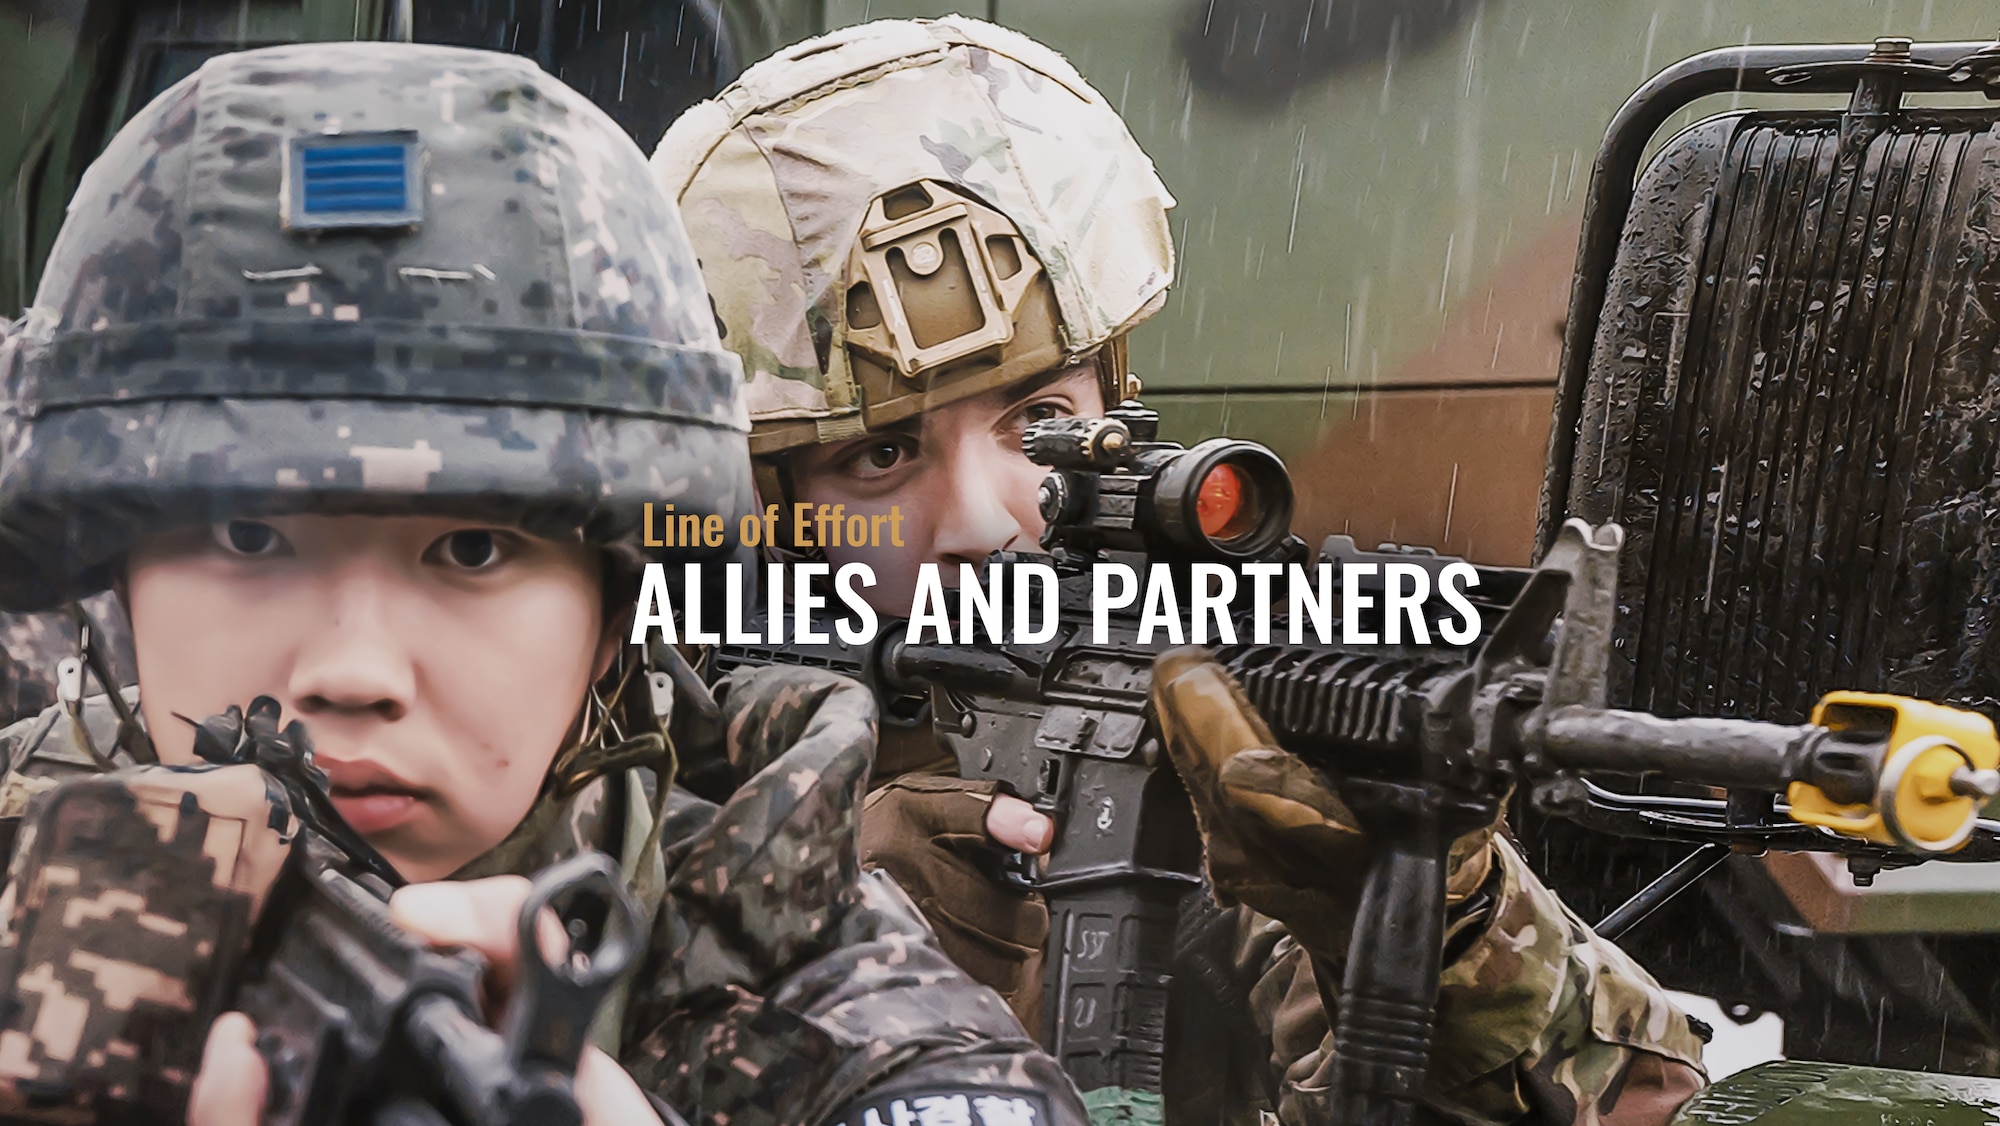 Line of Effort: Allies and Partners